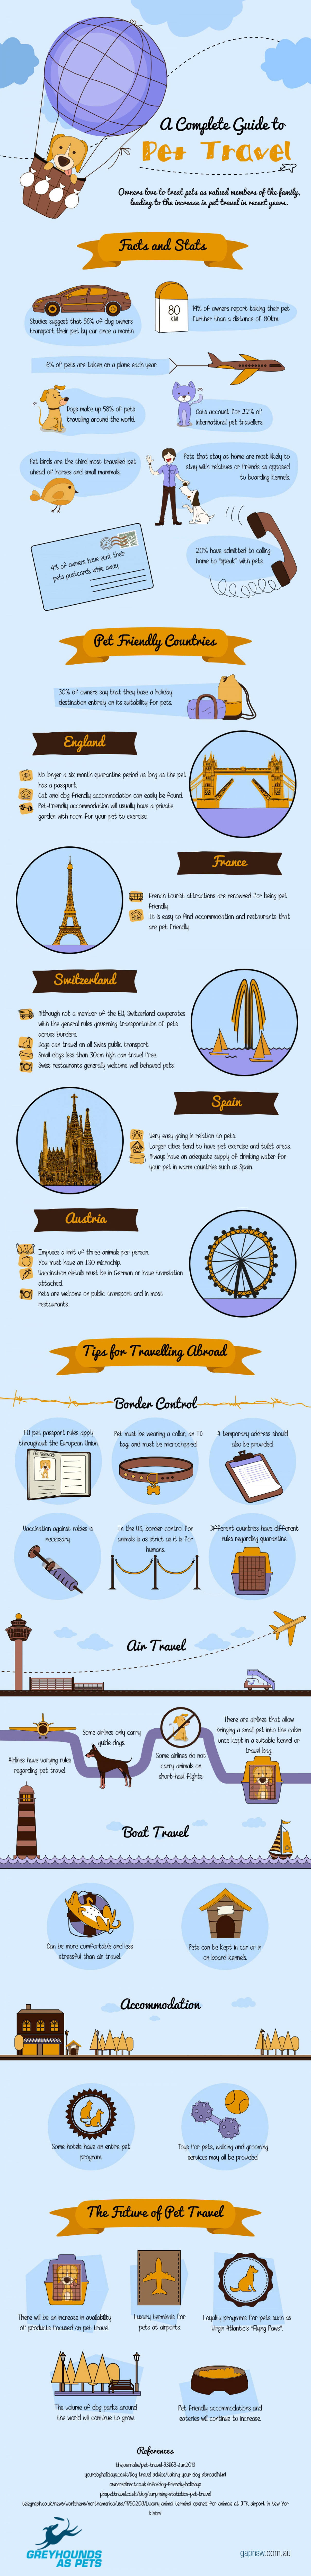 Complete Guide to Pet Travel Infographic